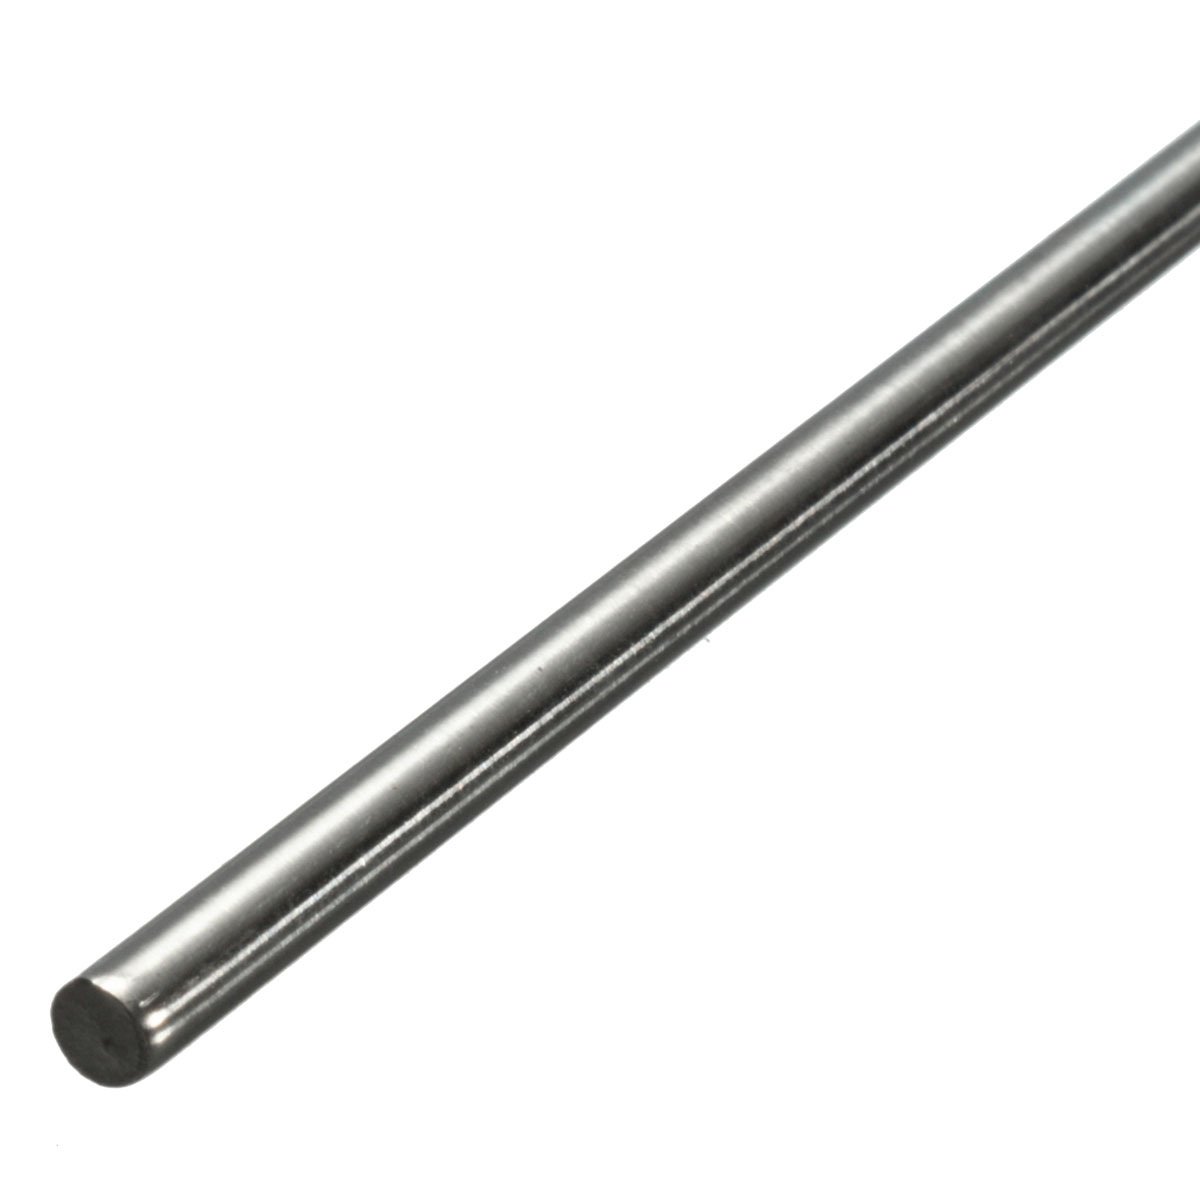 Materials 5pcs 500mm Diameter 3mm Stainless Steel Round Rod Round Solid Metal Bar Rod by FriccoBB 